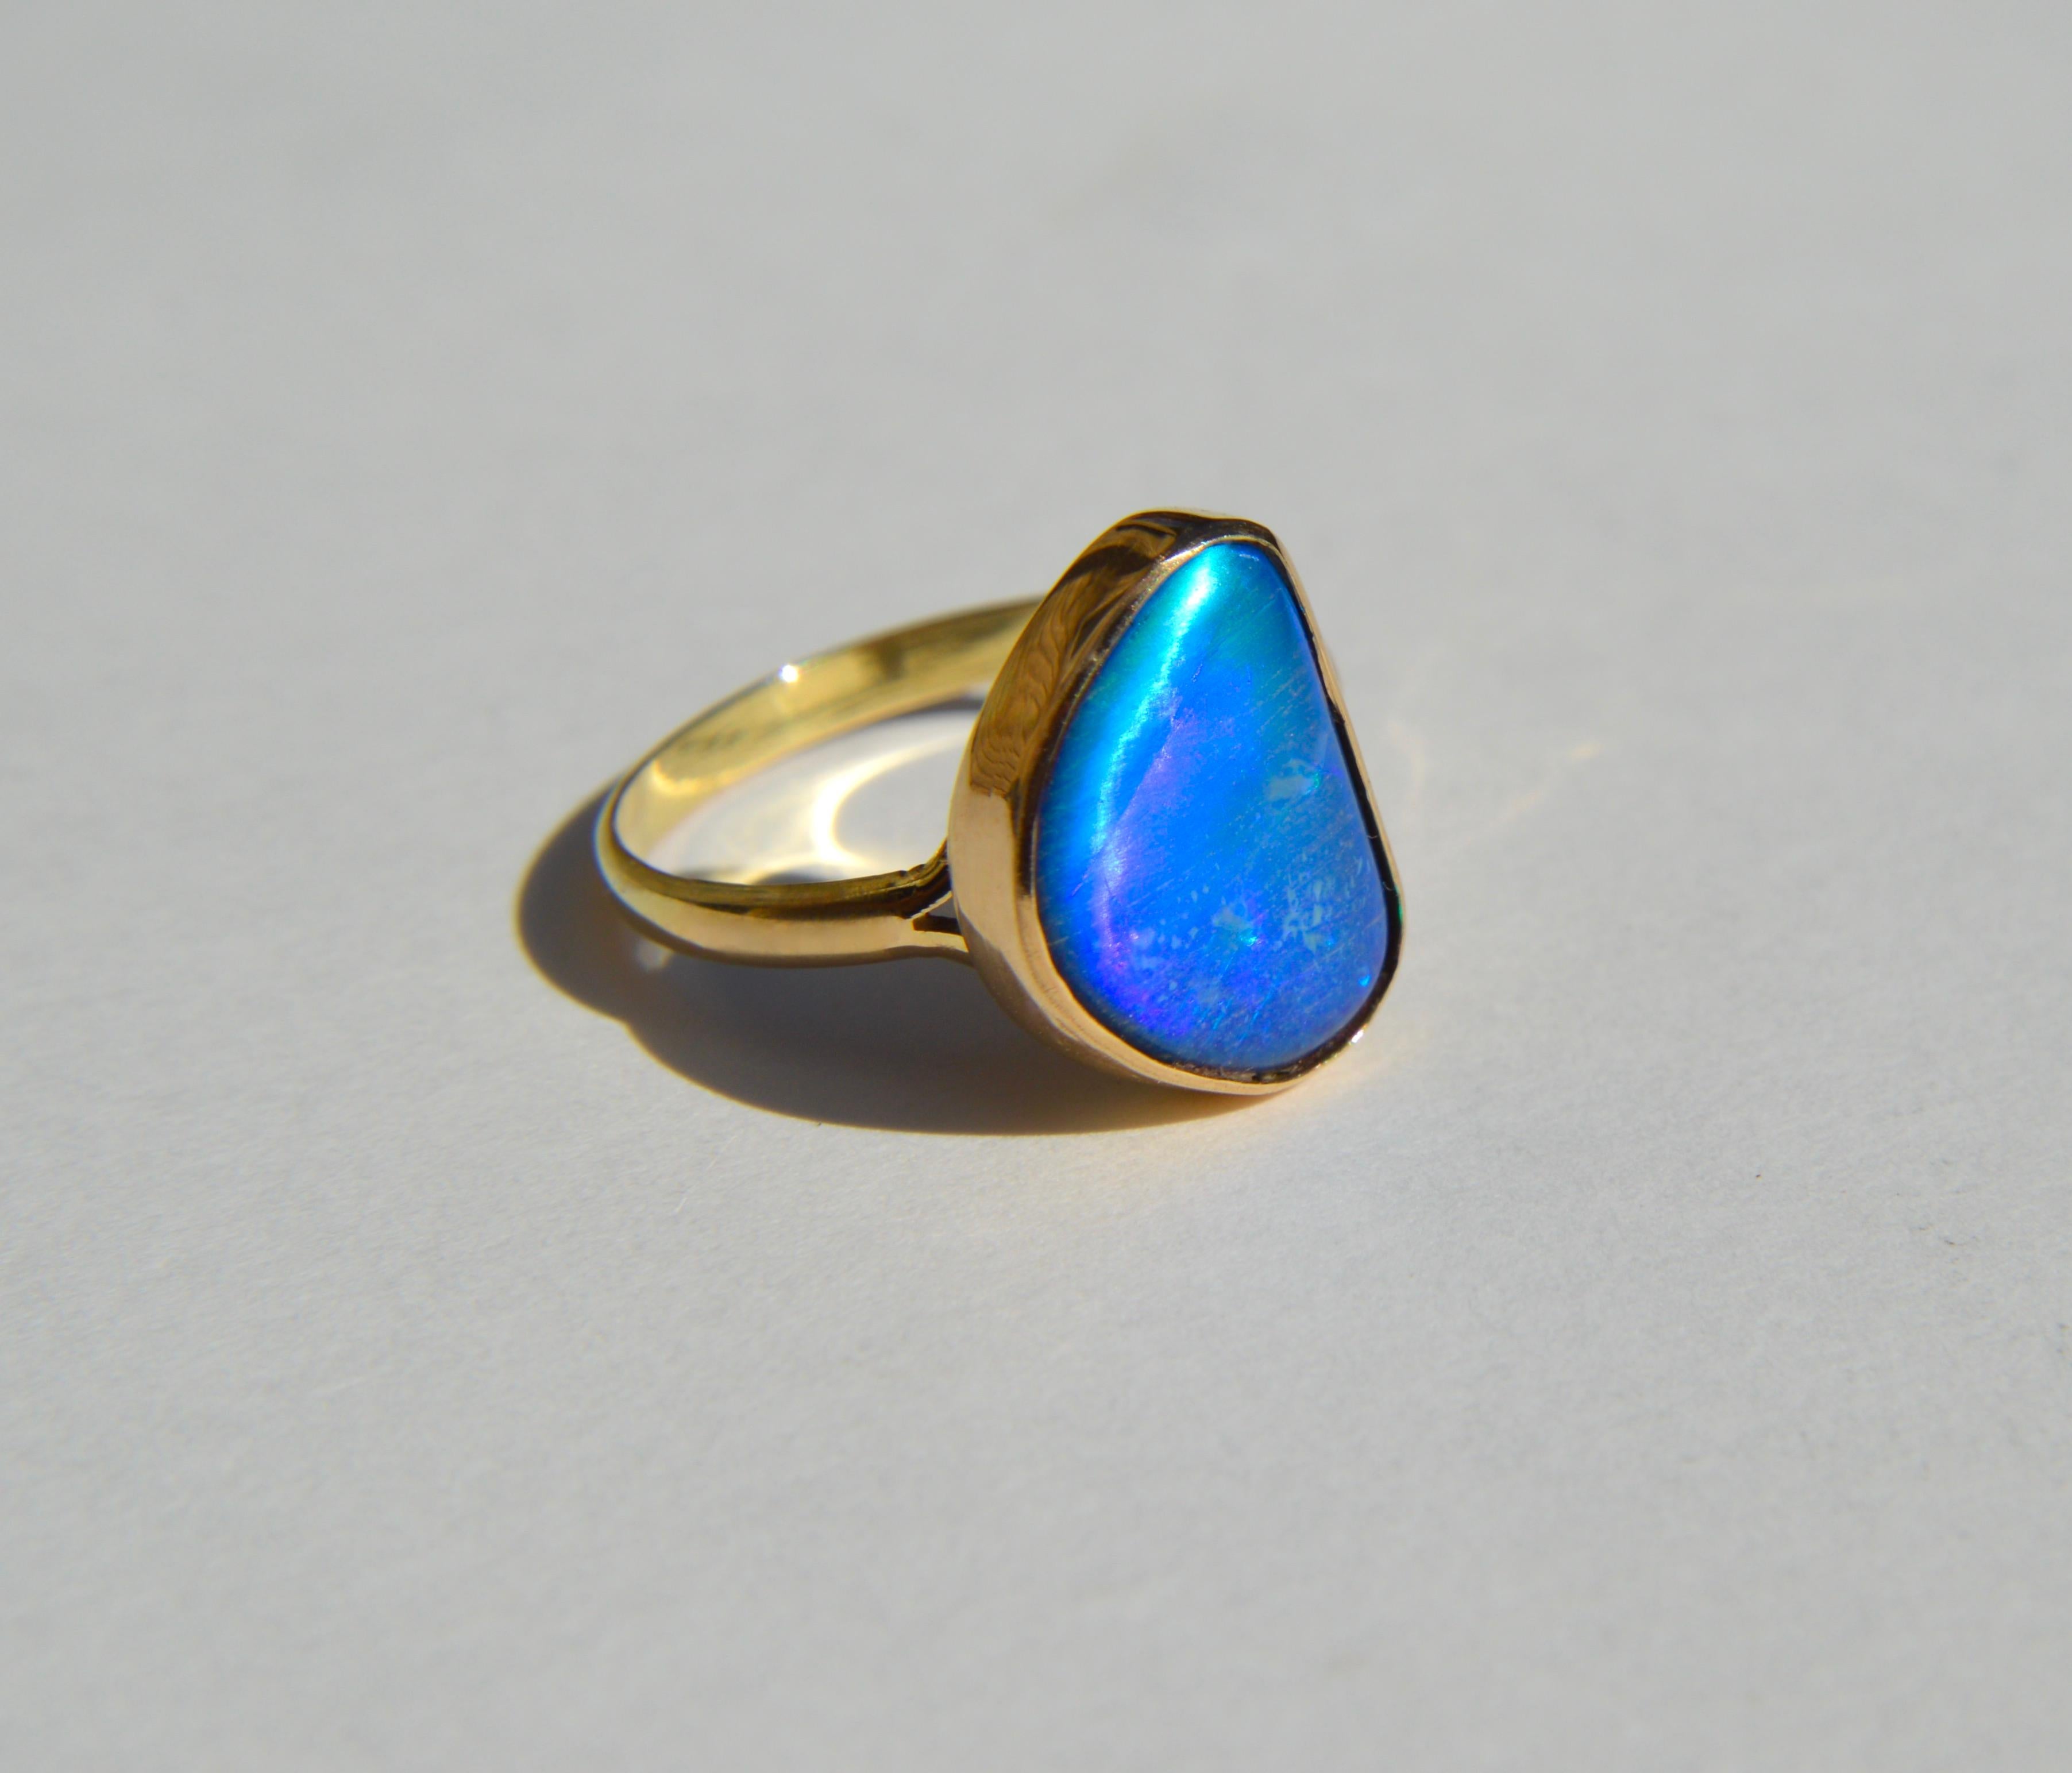 Vintage midcentury era circa 1960s stunning freeform blue boulder opal ring in 14K yellow gold. Opal measures 13x10mm. Size 6, Can be resized by a jeweler. Ring is unmarked but tested as solid 14K gold. In very good condition. Ring weighs 2.41